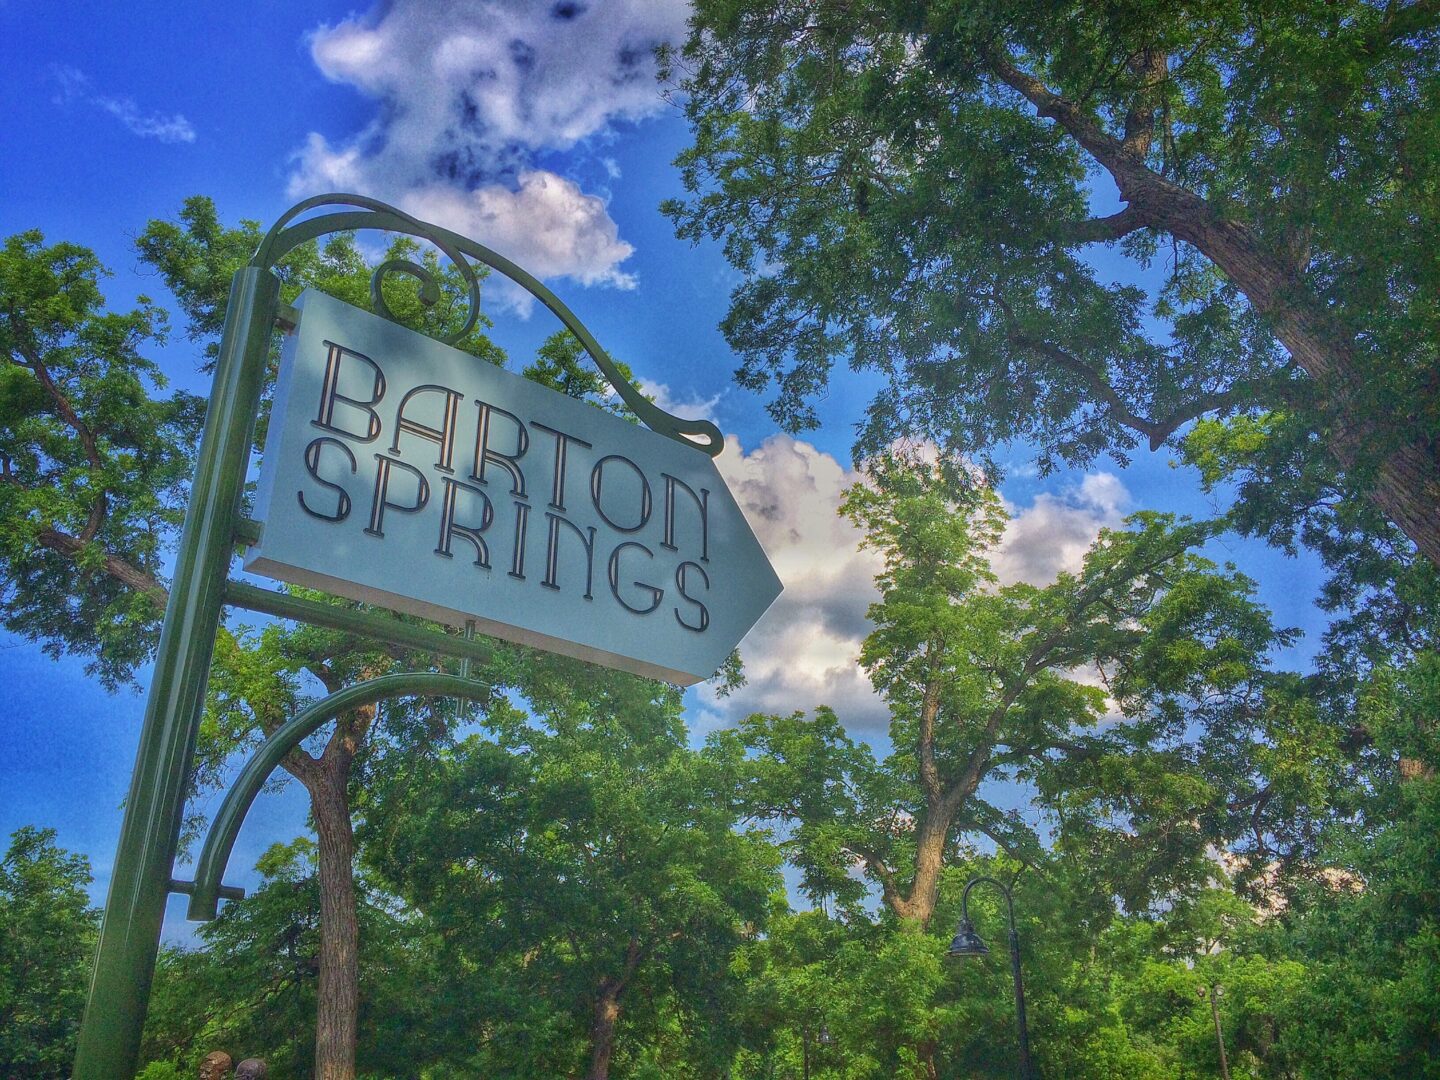 A sign for barton springs in front of trees.